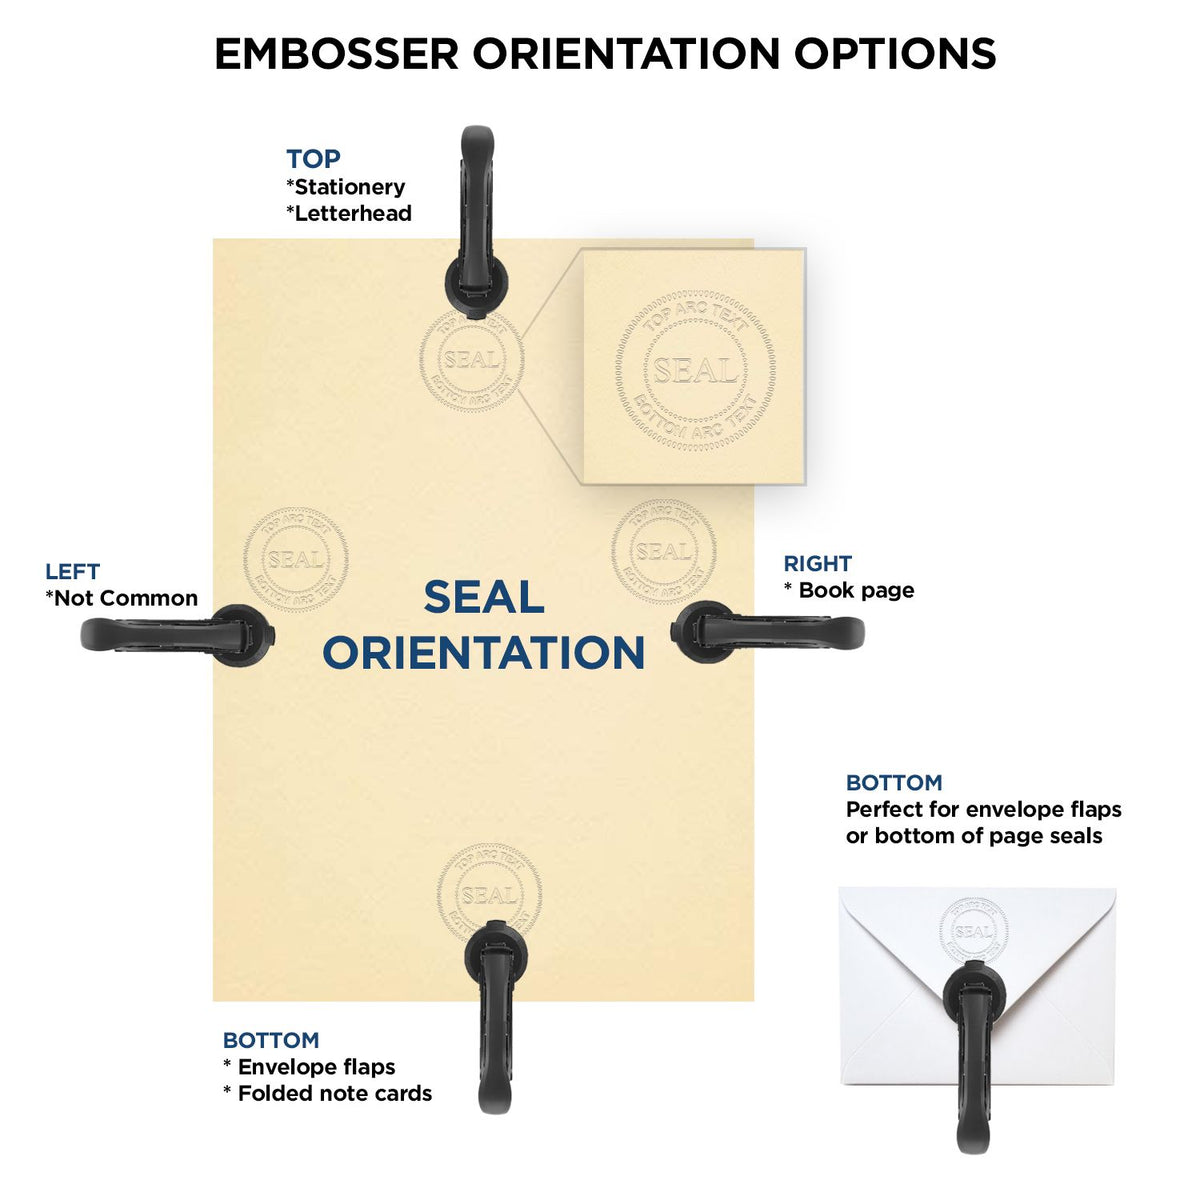 An infographic for the Hybrid Kentucky Land Surveyor Seal showing embosser orientation, this is showing examples of a top, bottom, right and left insert.